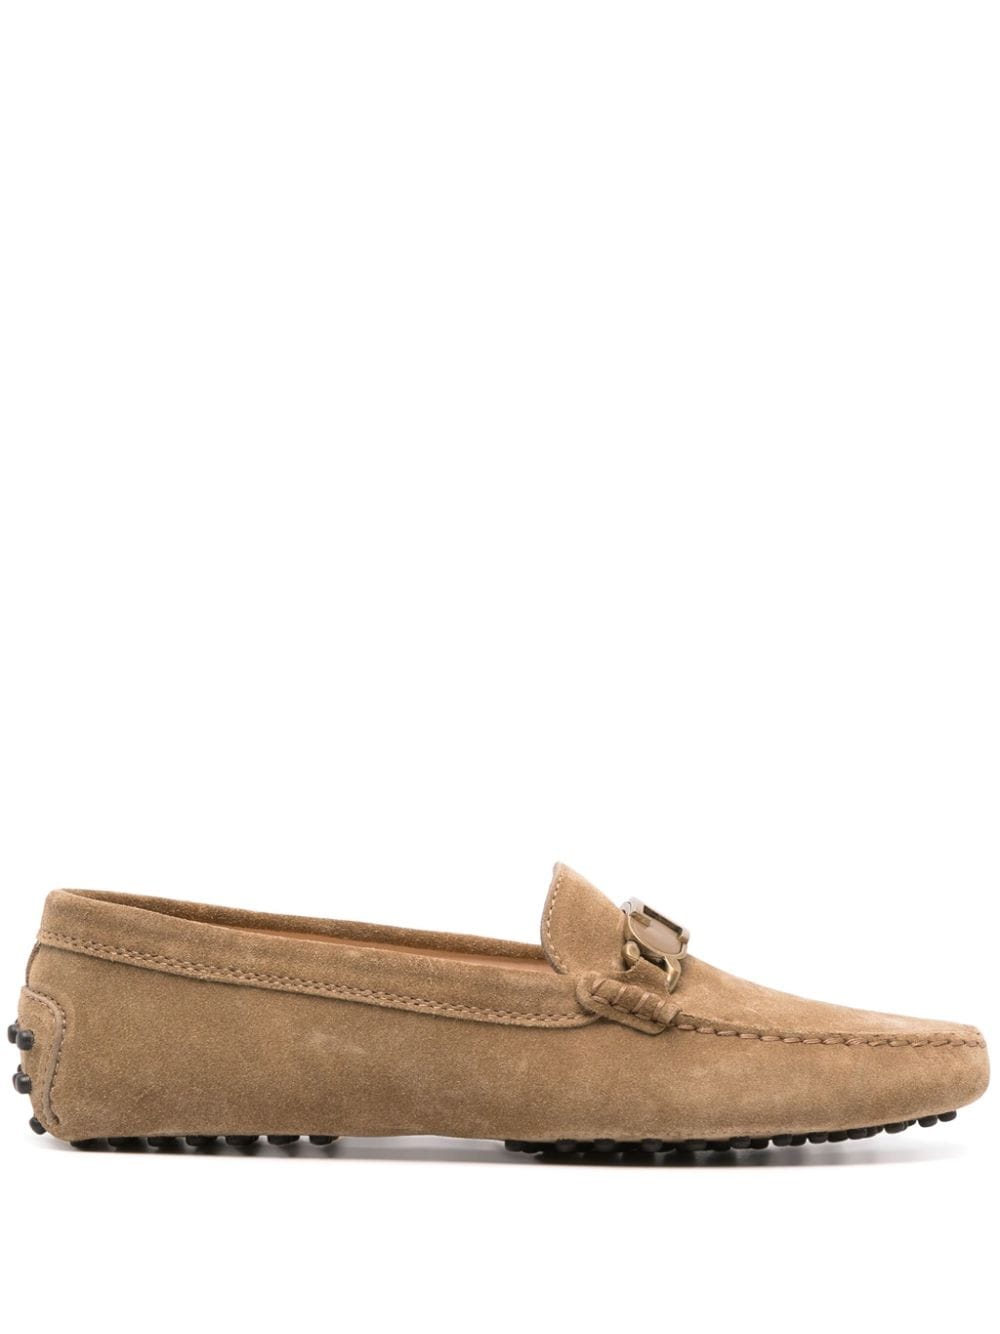 TOD'S GOMMINO LOGO-PLAQUE SUEDE LOAFERS